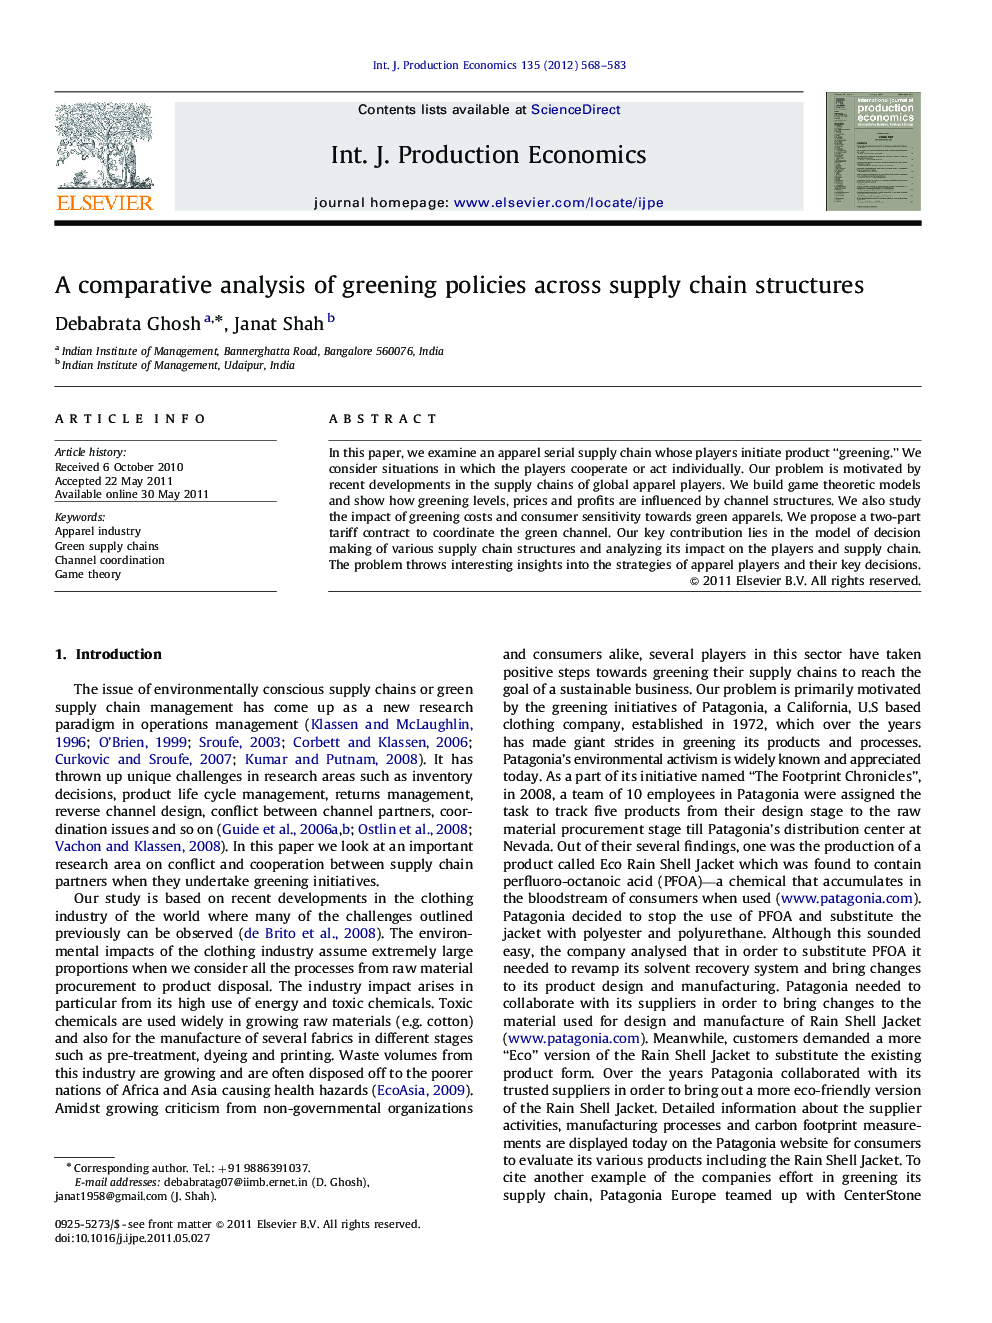 A comparative analysis of greening policies across supply chain structures